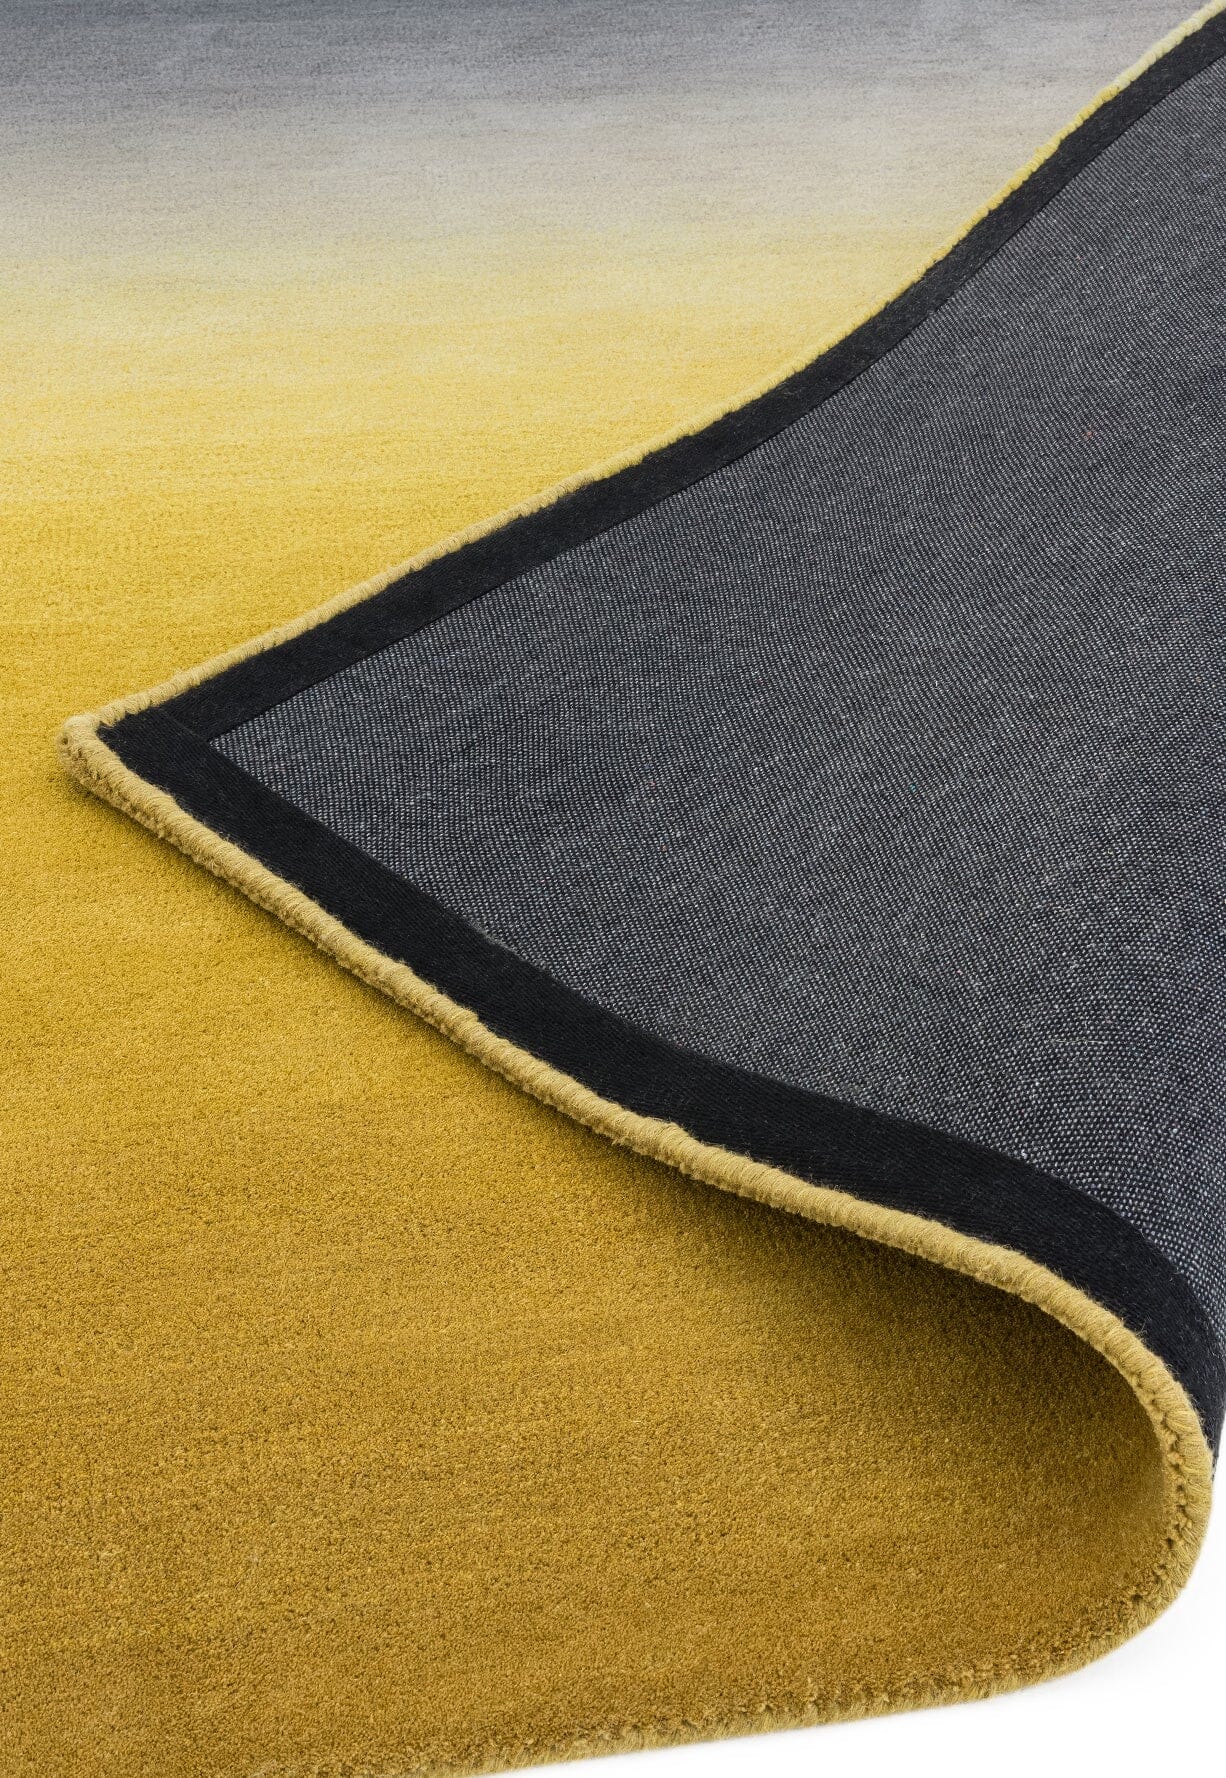 Asiatic Carpets Ombre Hand Tufted Rug Mustard - 120 x 170cm